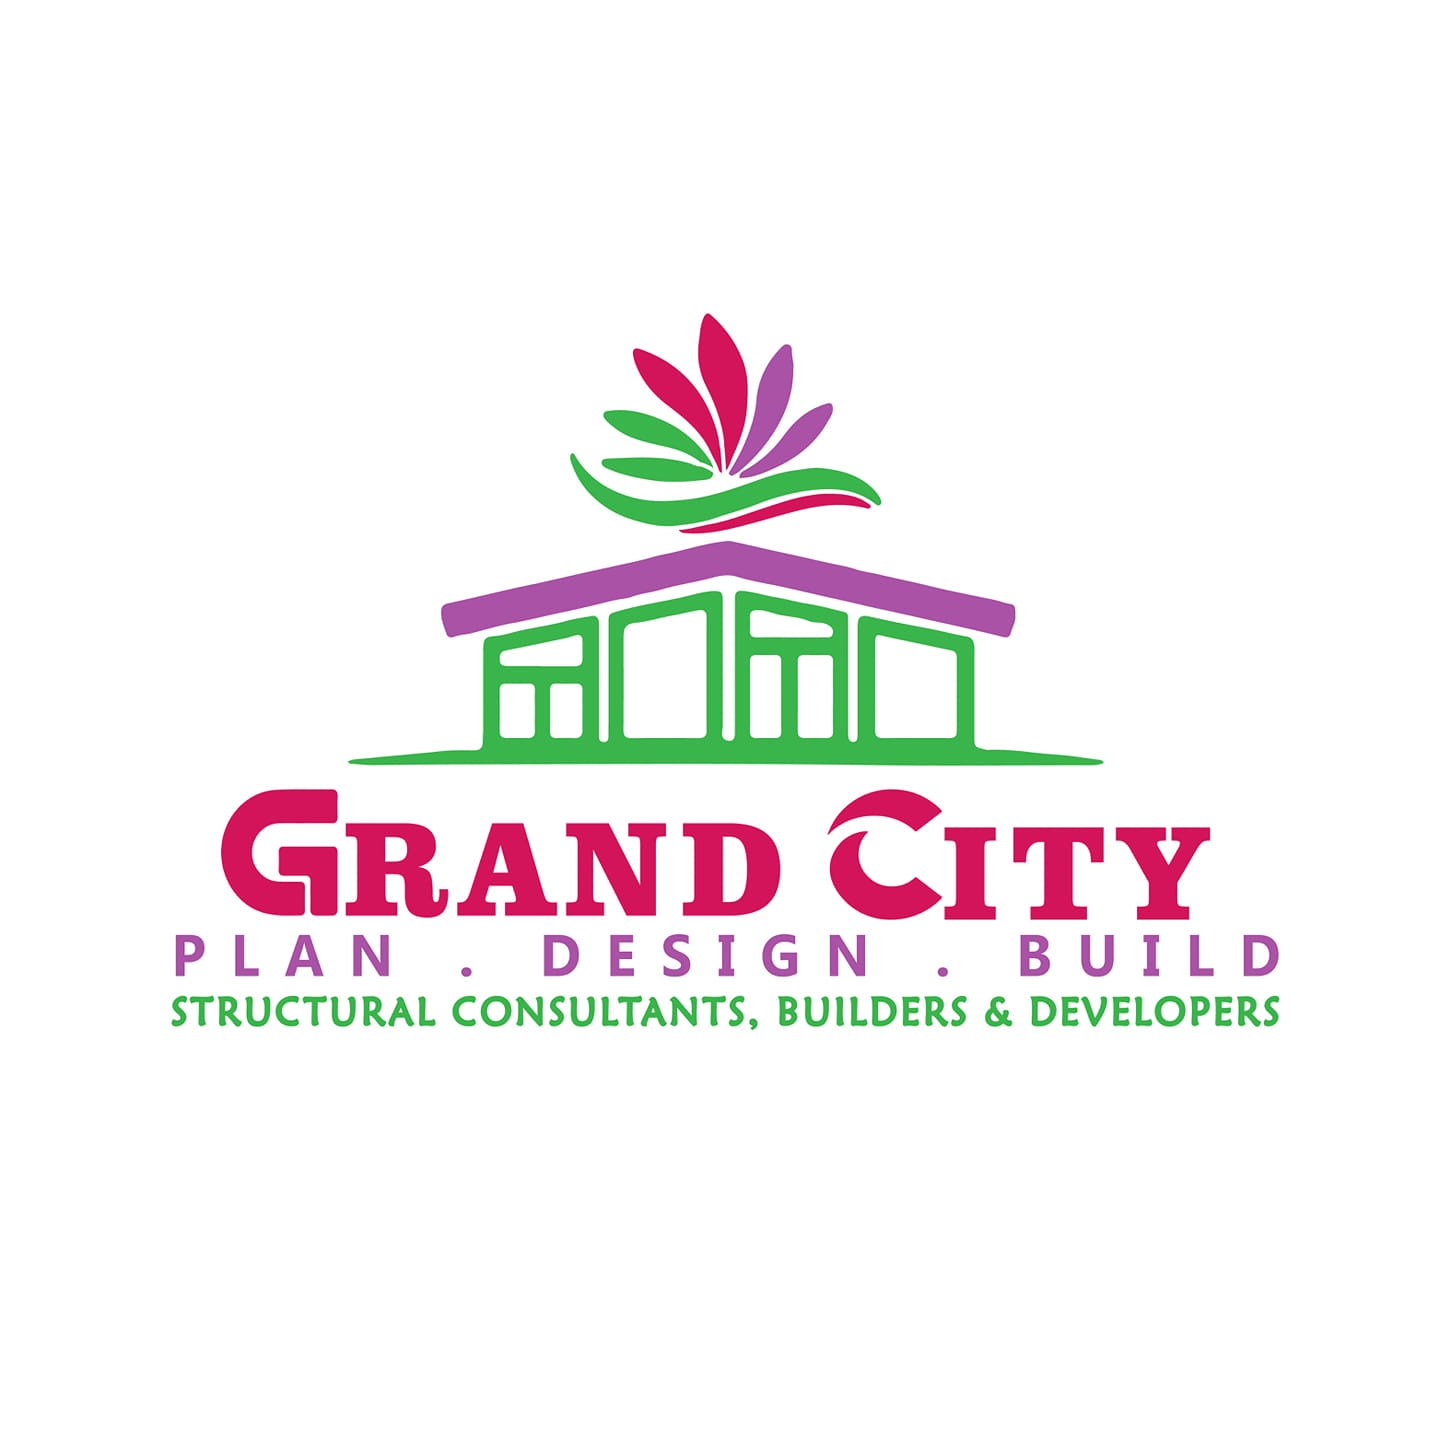 GRAND CITY, Structural Consultants, Builders & Developers - Logo